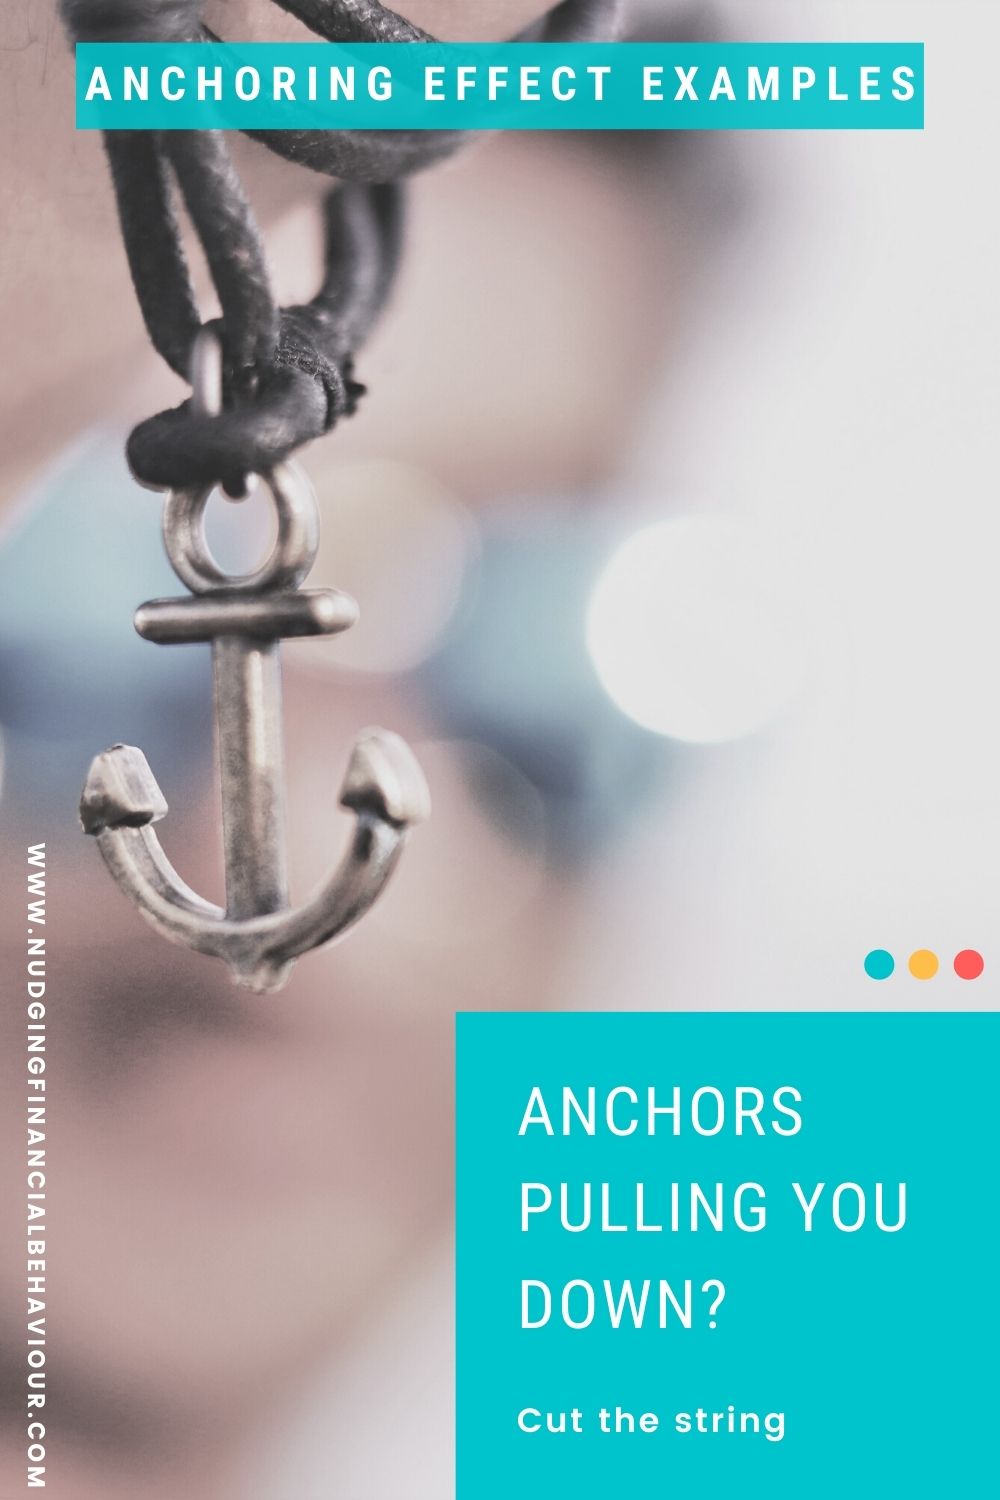 Anchoring effect examples